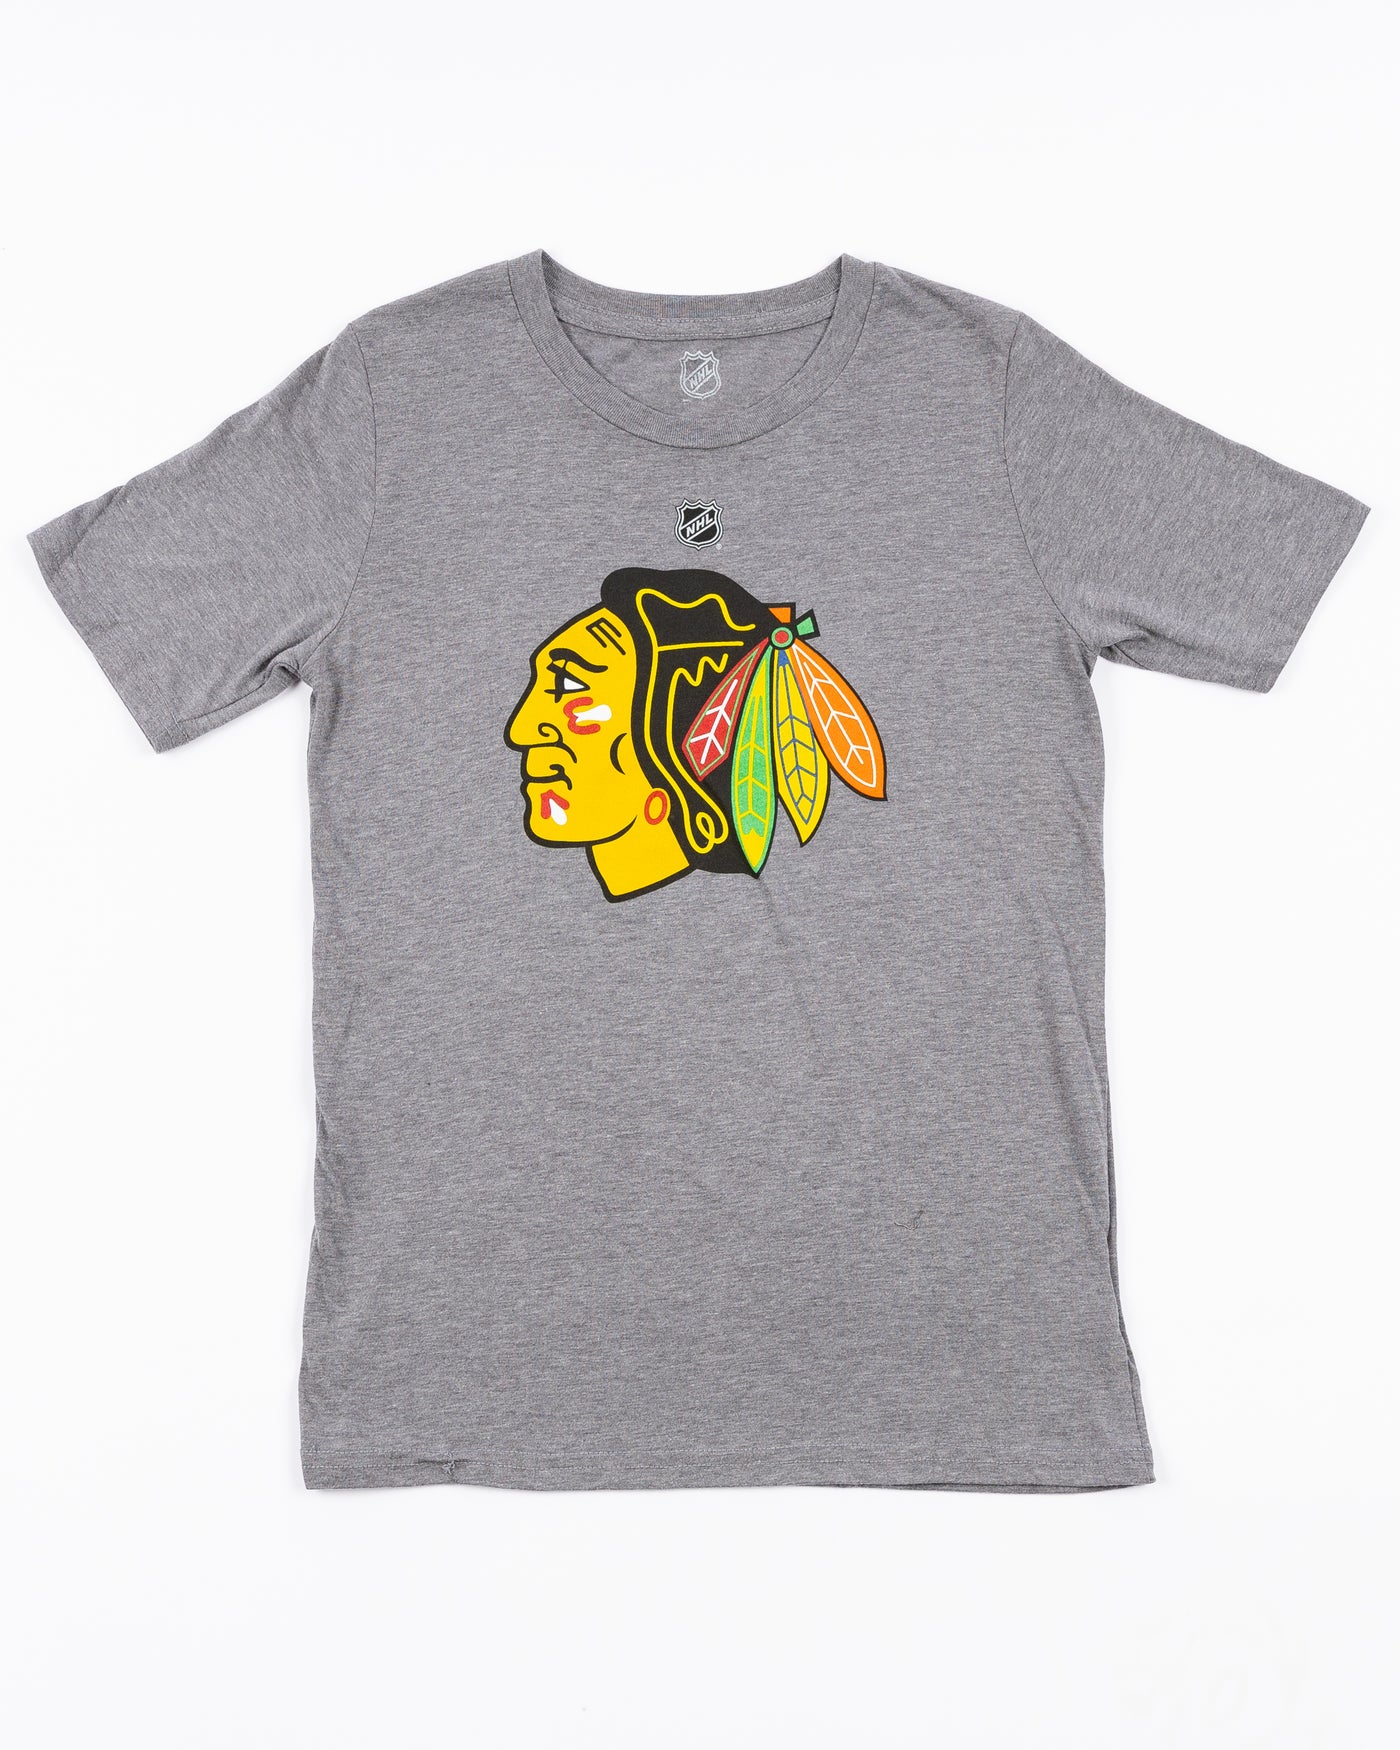 youth heather grey triblend short sleeve tee with Chicago Blackhawks primary logo across front - front lay flat